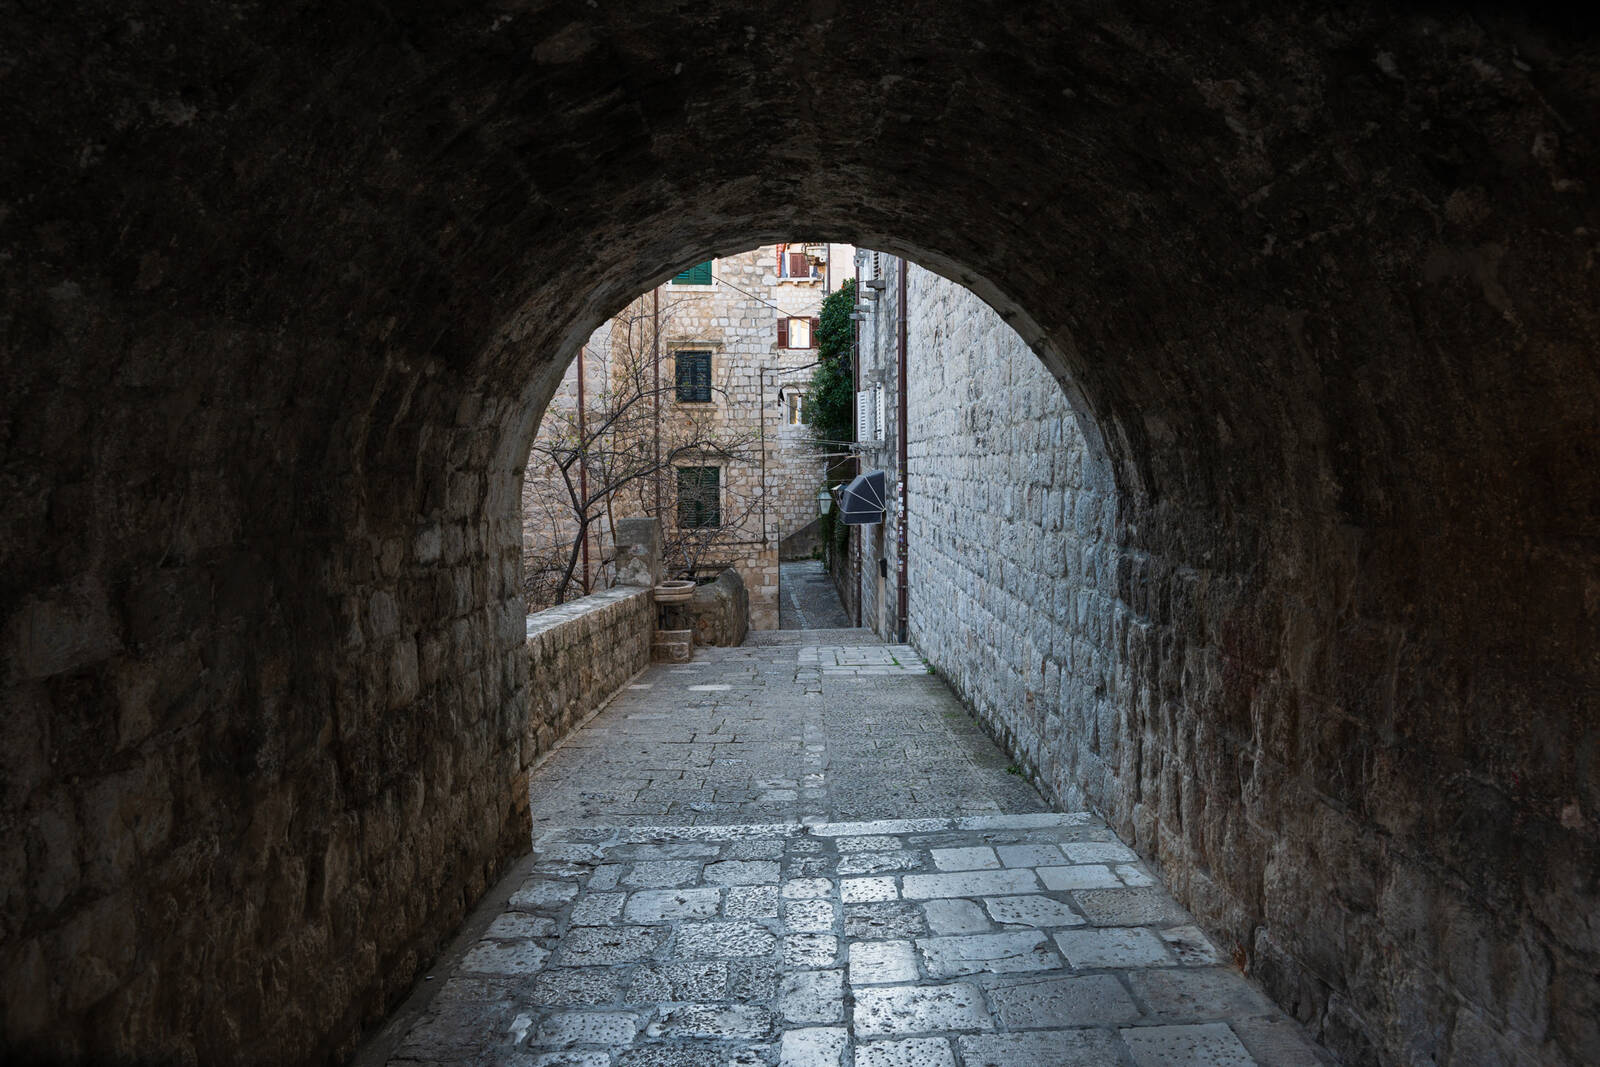 Image of Streets of Dubrovnik - South by Luka Esenko